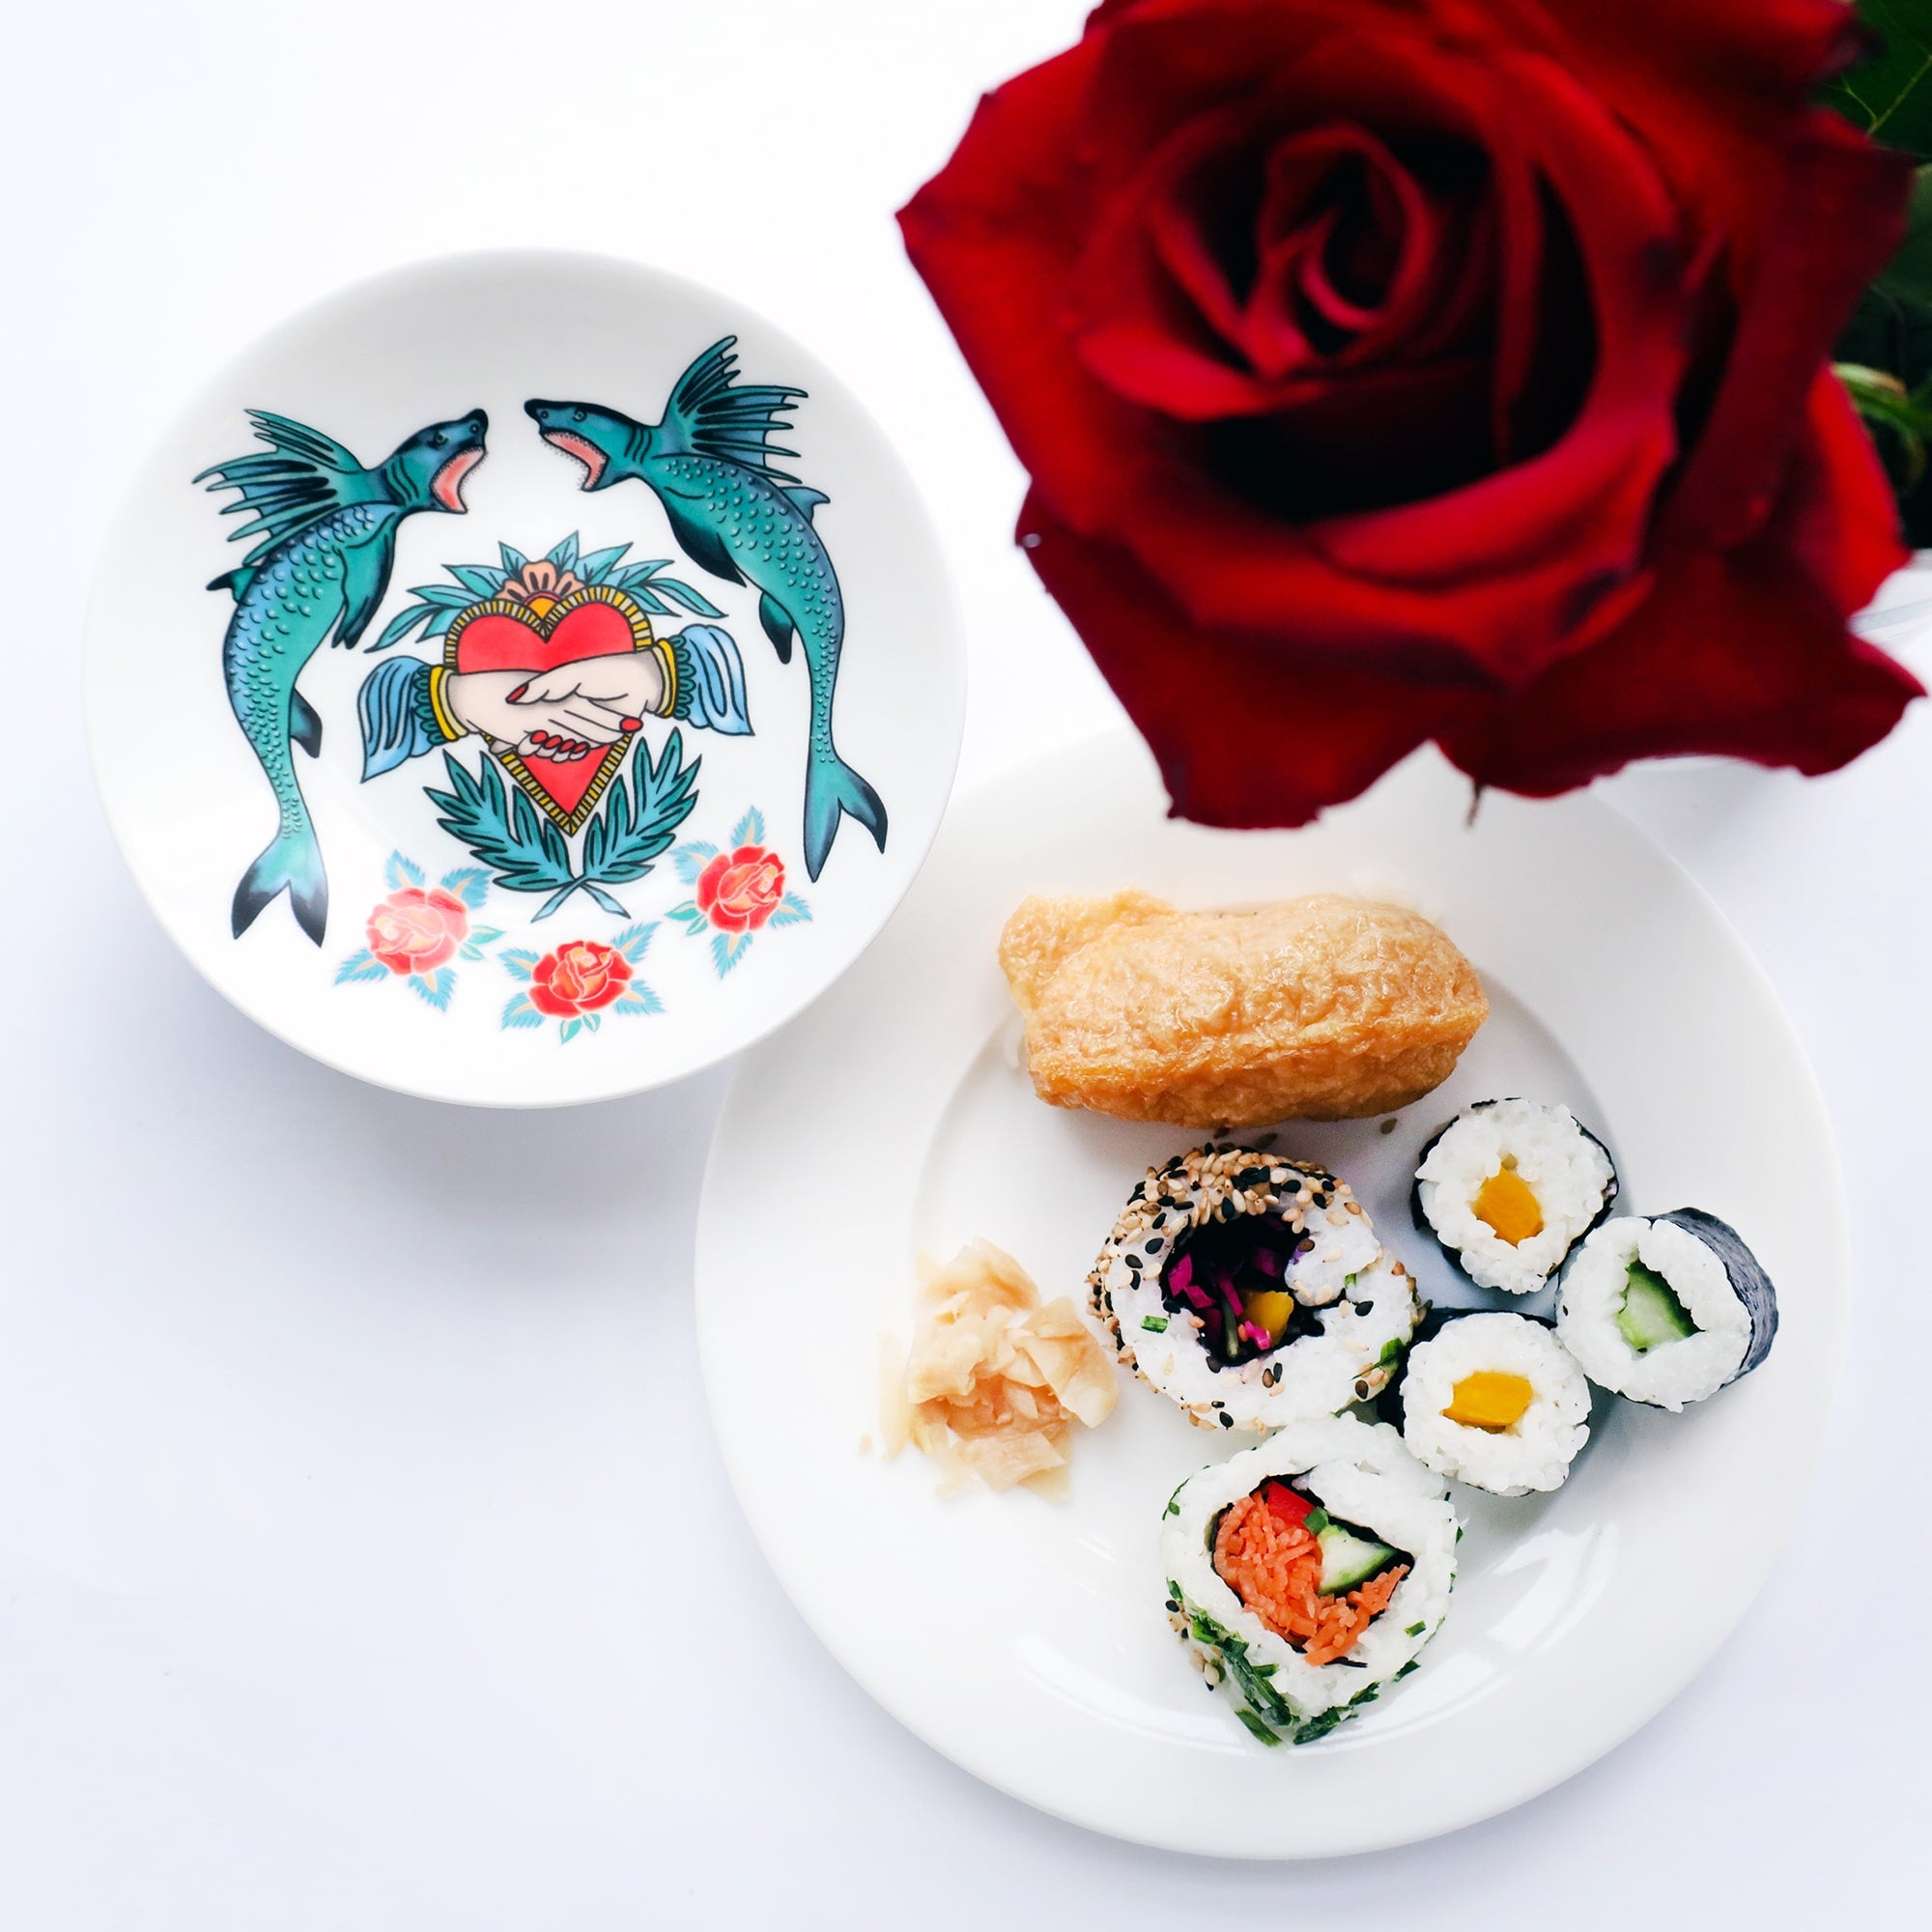 Nibbles dish with sharks, heart and hand and roses in a tattoo style. there is a plate of sushi next to it and a red rose.